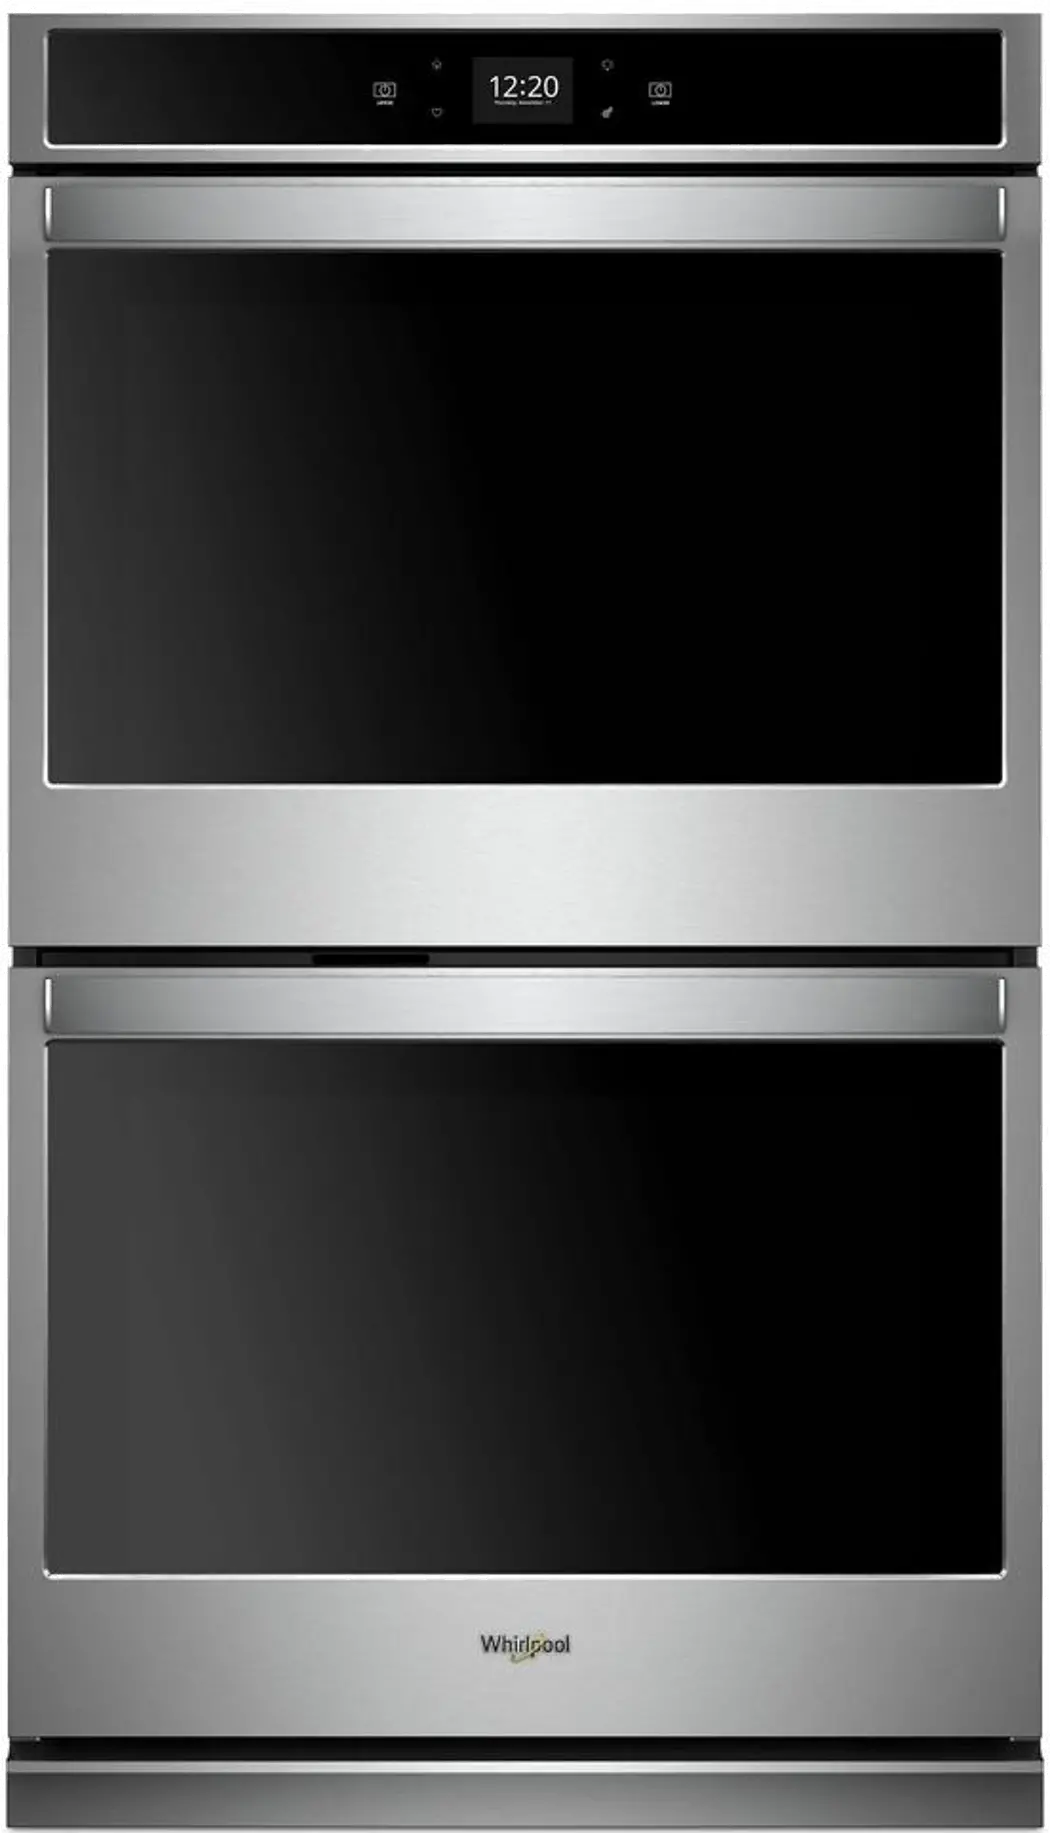 Whirlpool gray double wall oven